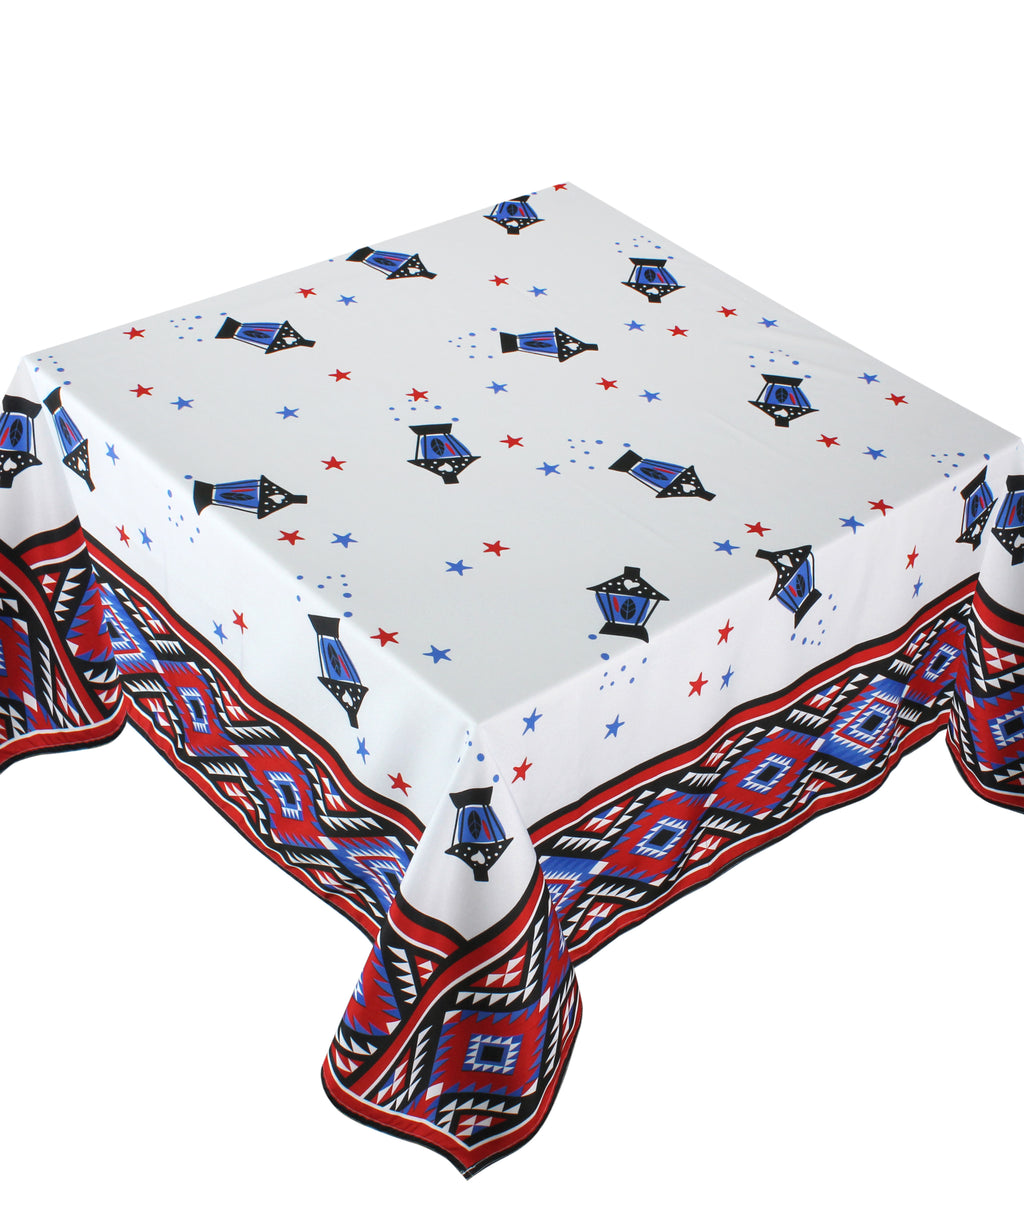 The Badawi lanterns table cover